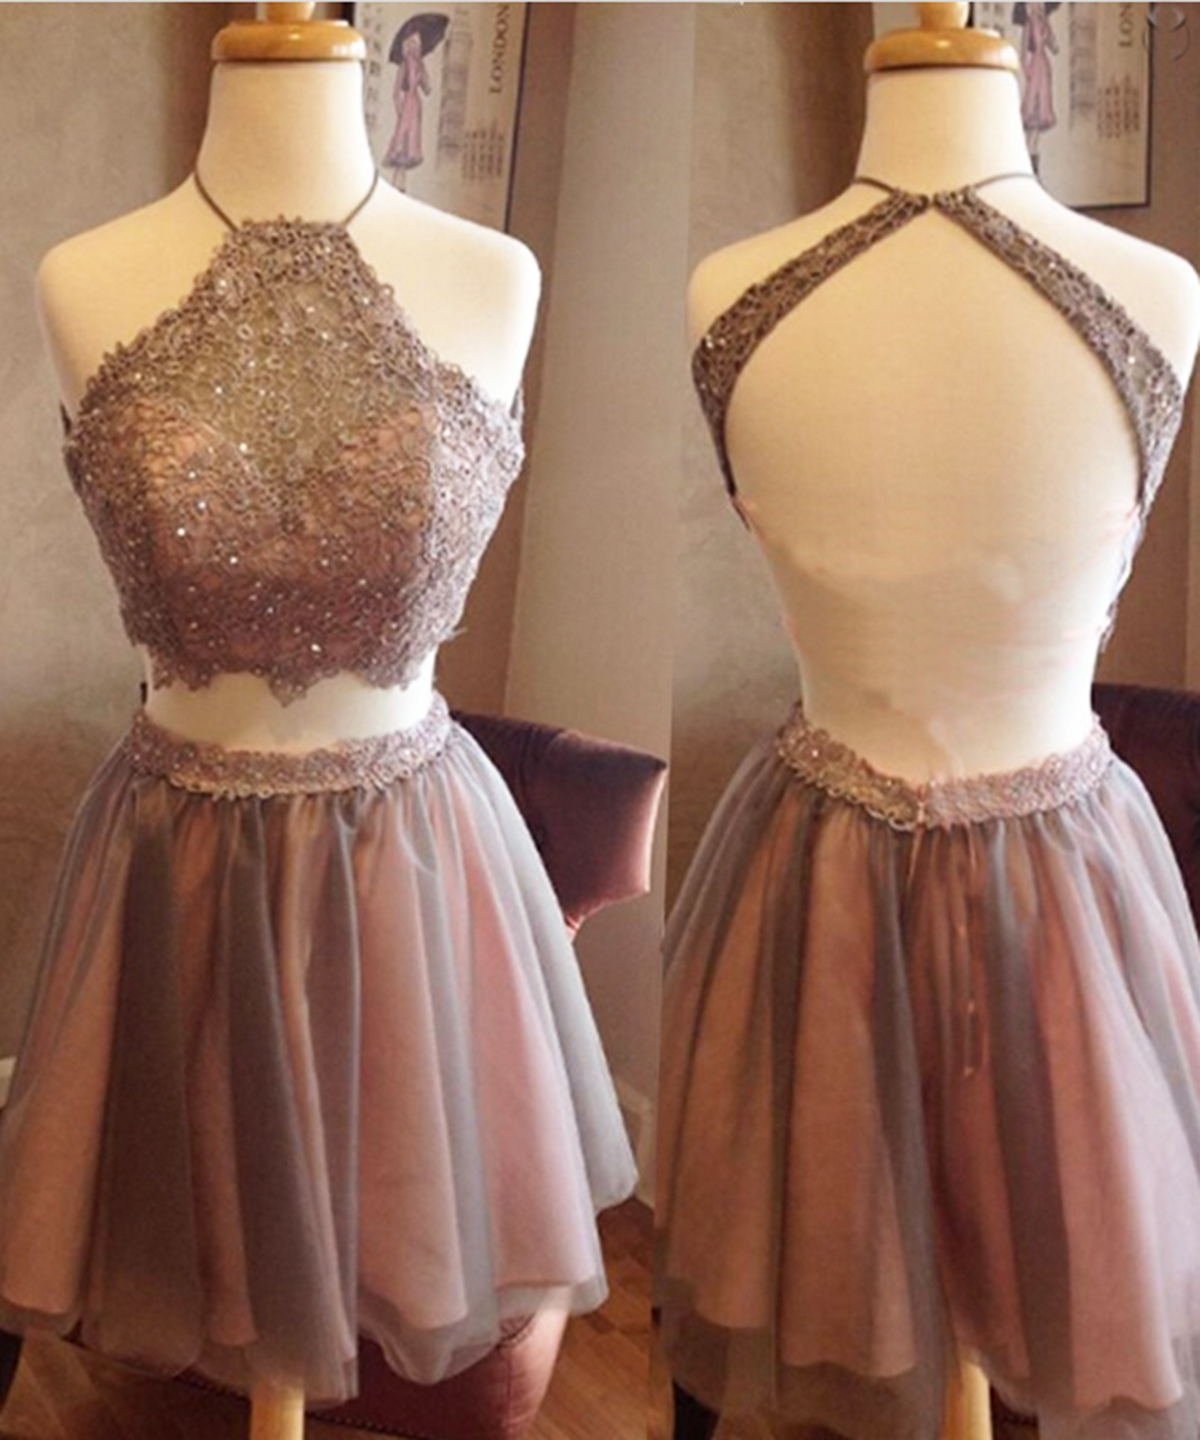 Cute Two Pieces Backless Short Lace Homecoming Dress, Brown Tulle Mini Dress, Bridesmaid Dress